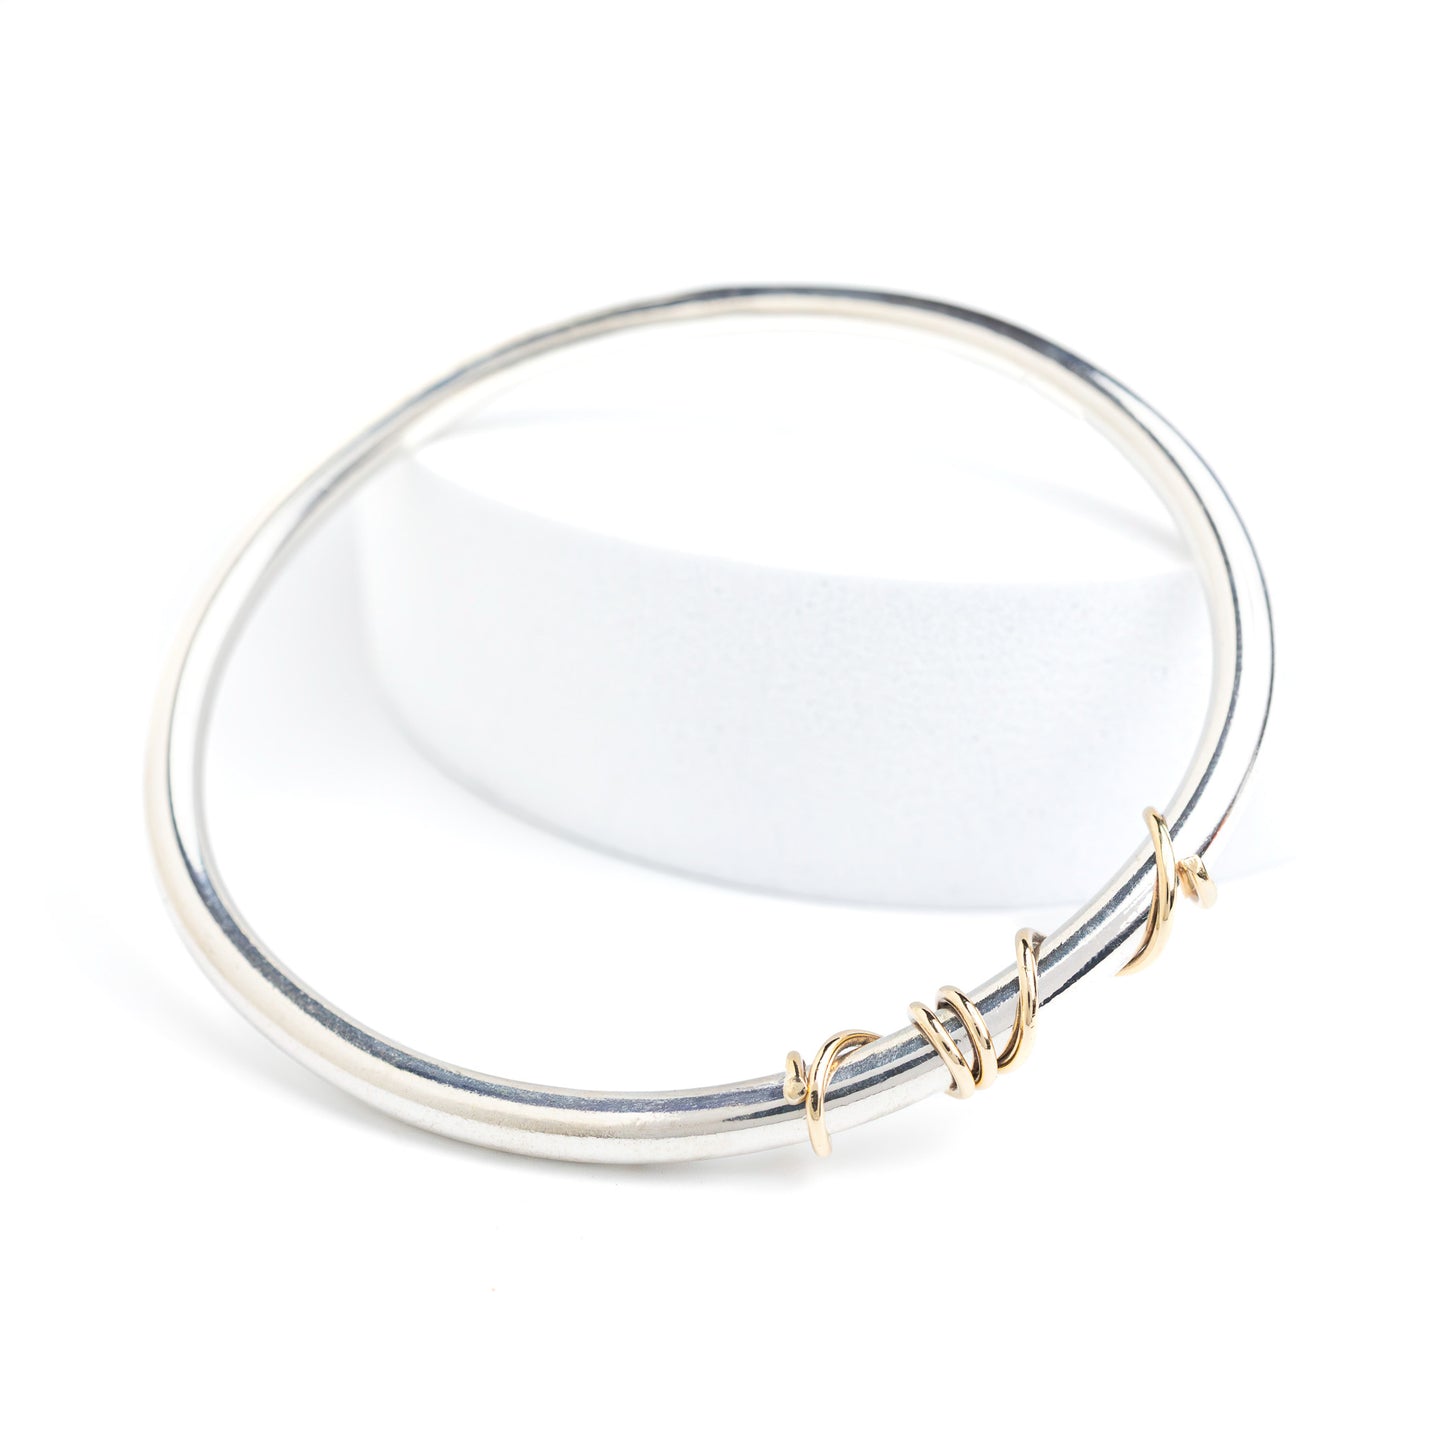 handmade sterling silver solid bangle with 9ct gold wrap of wire twisted around the front of the bangle on a white out background